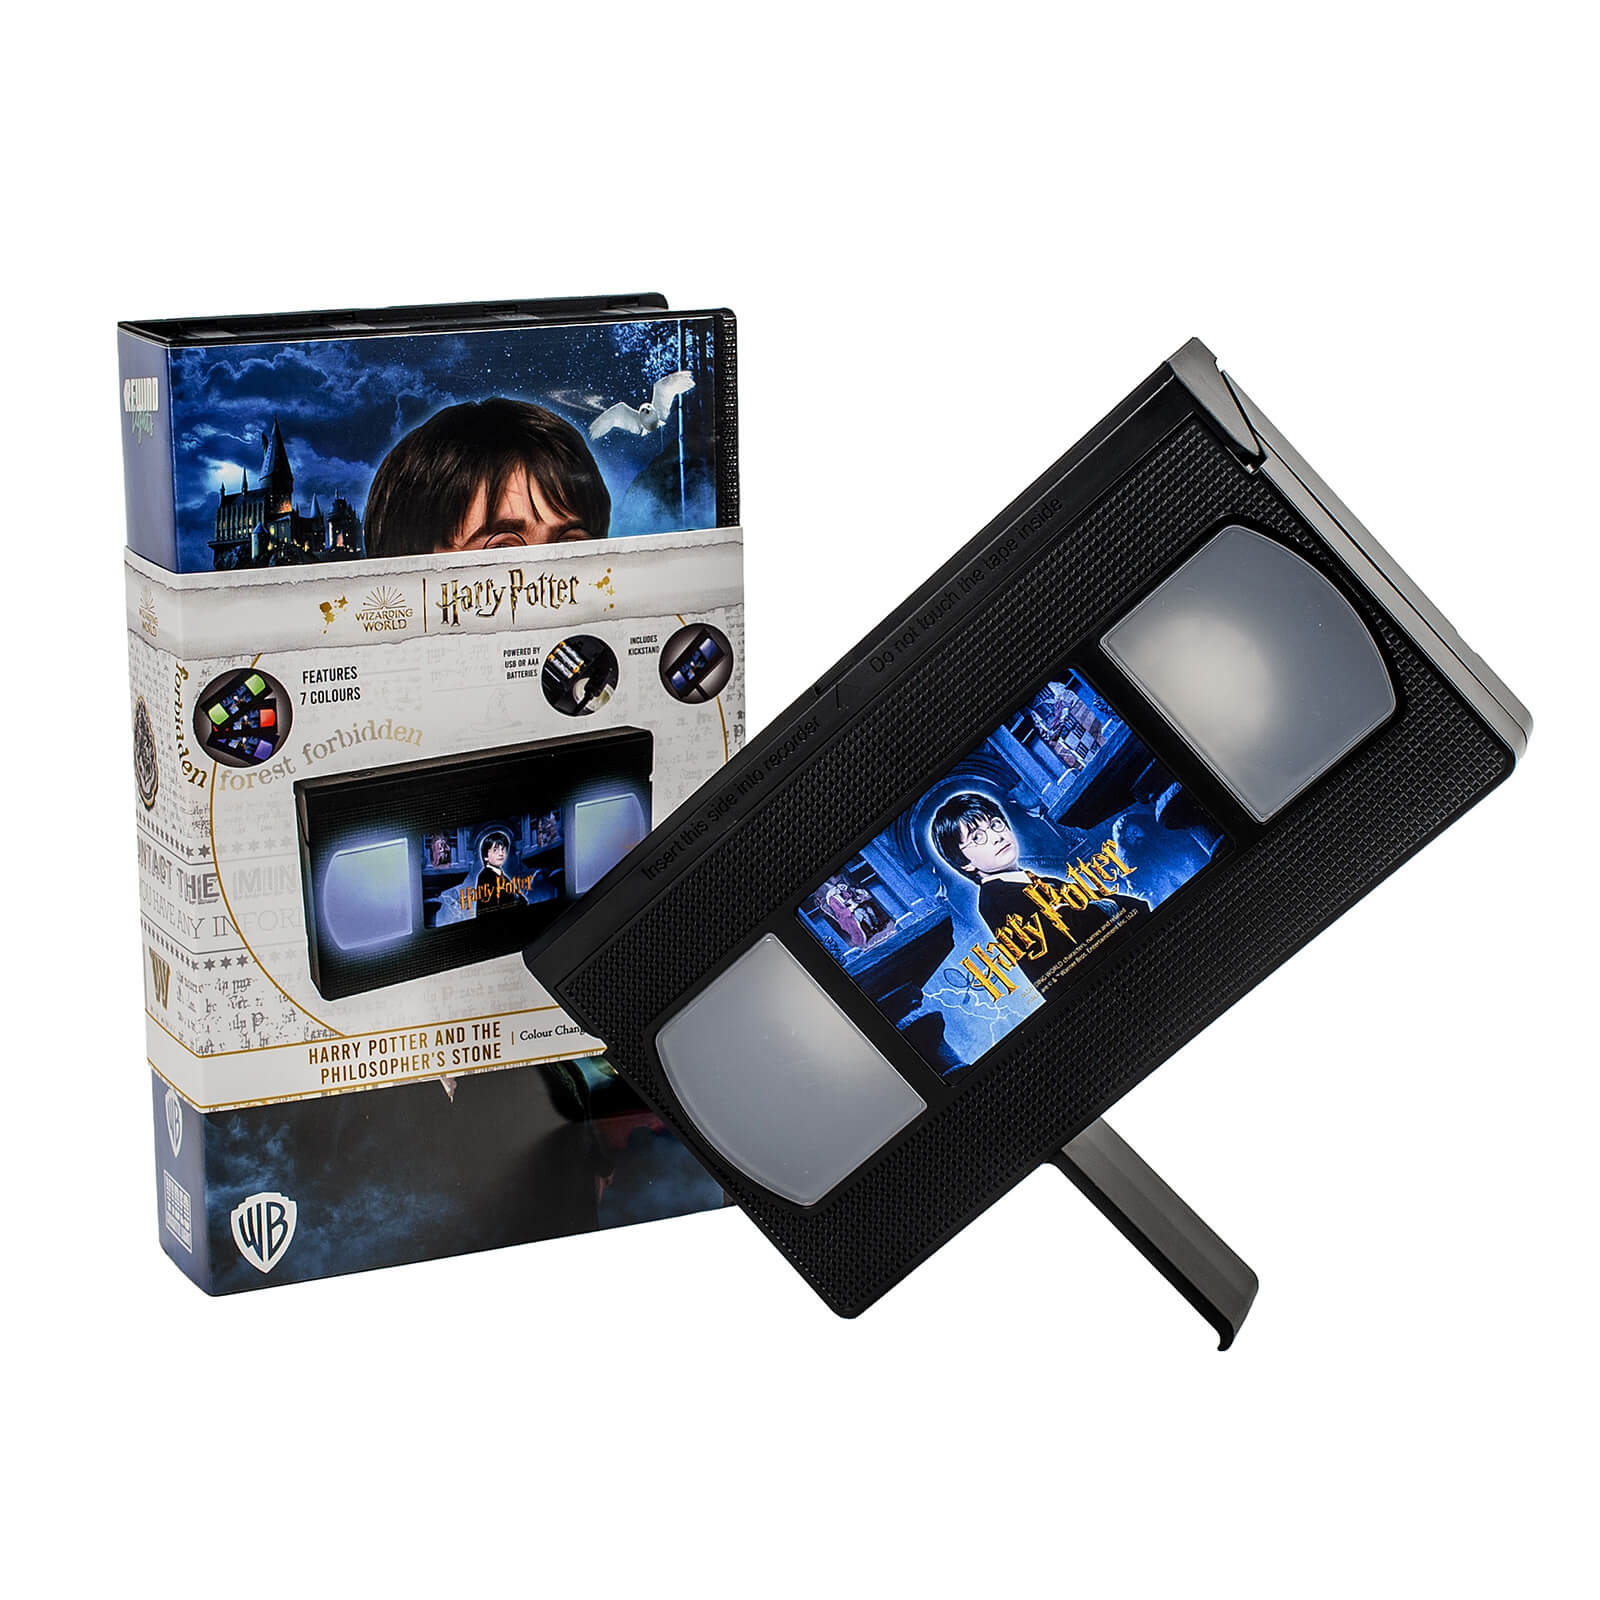 Photos - Other Souvenirs Potter Harry  And The Philsopher's Stone: Rewind Lights Video Light 1128600 